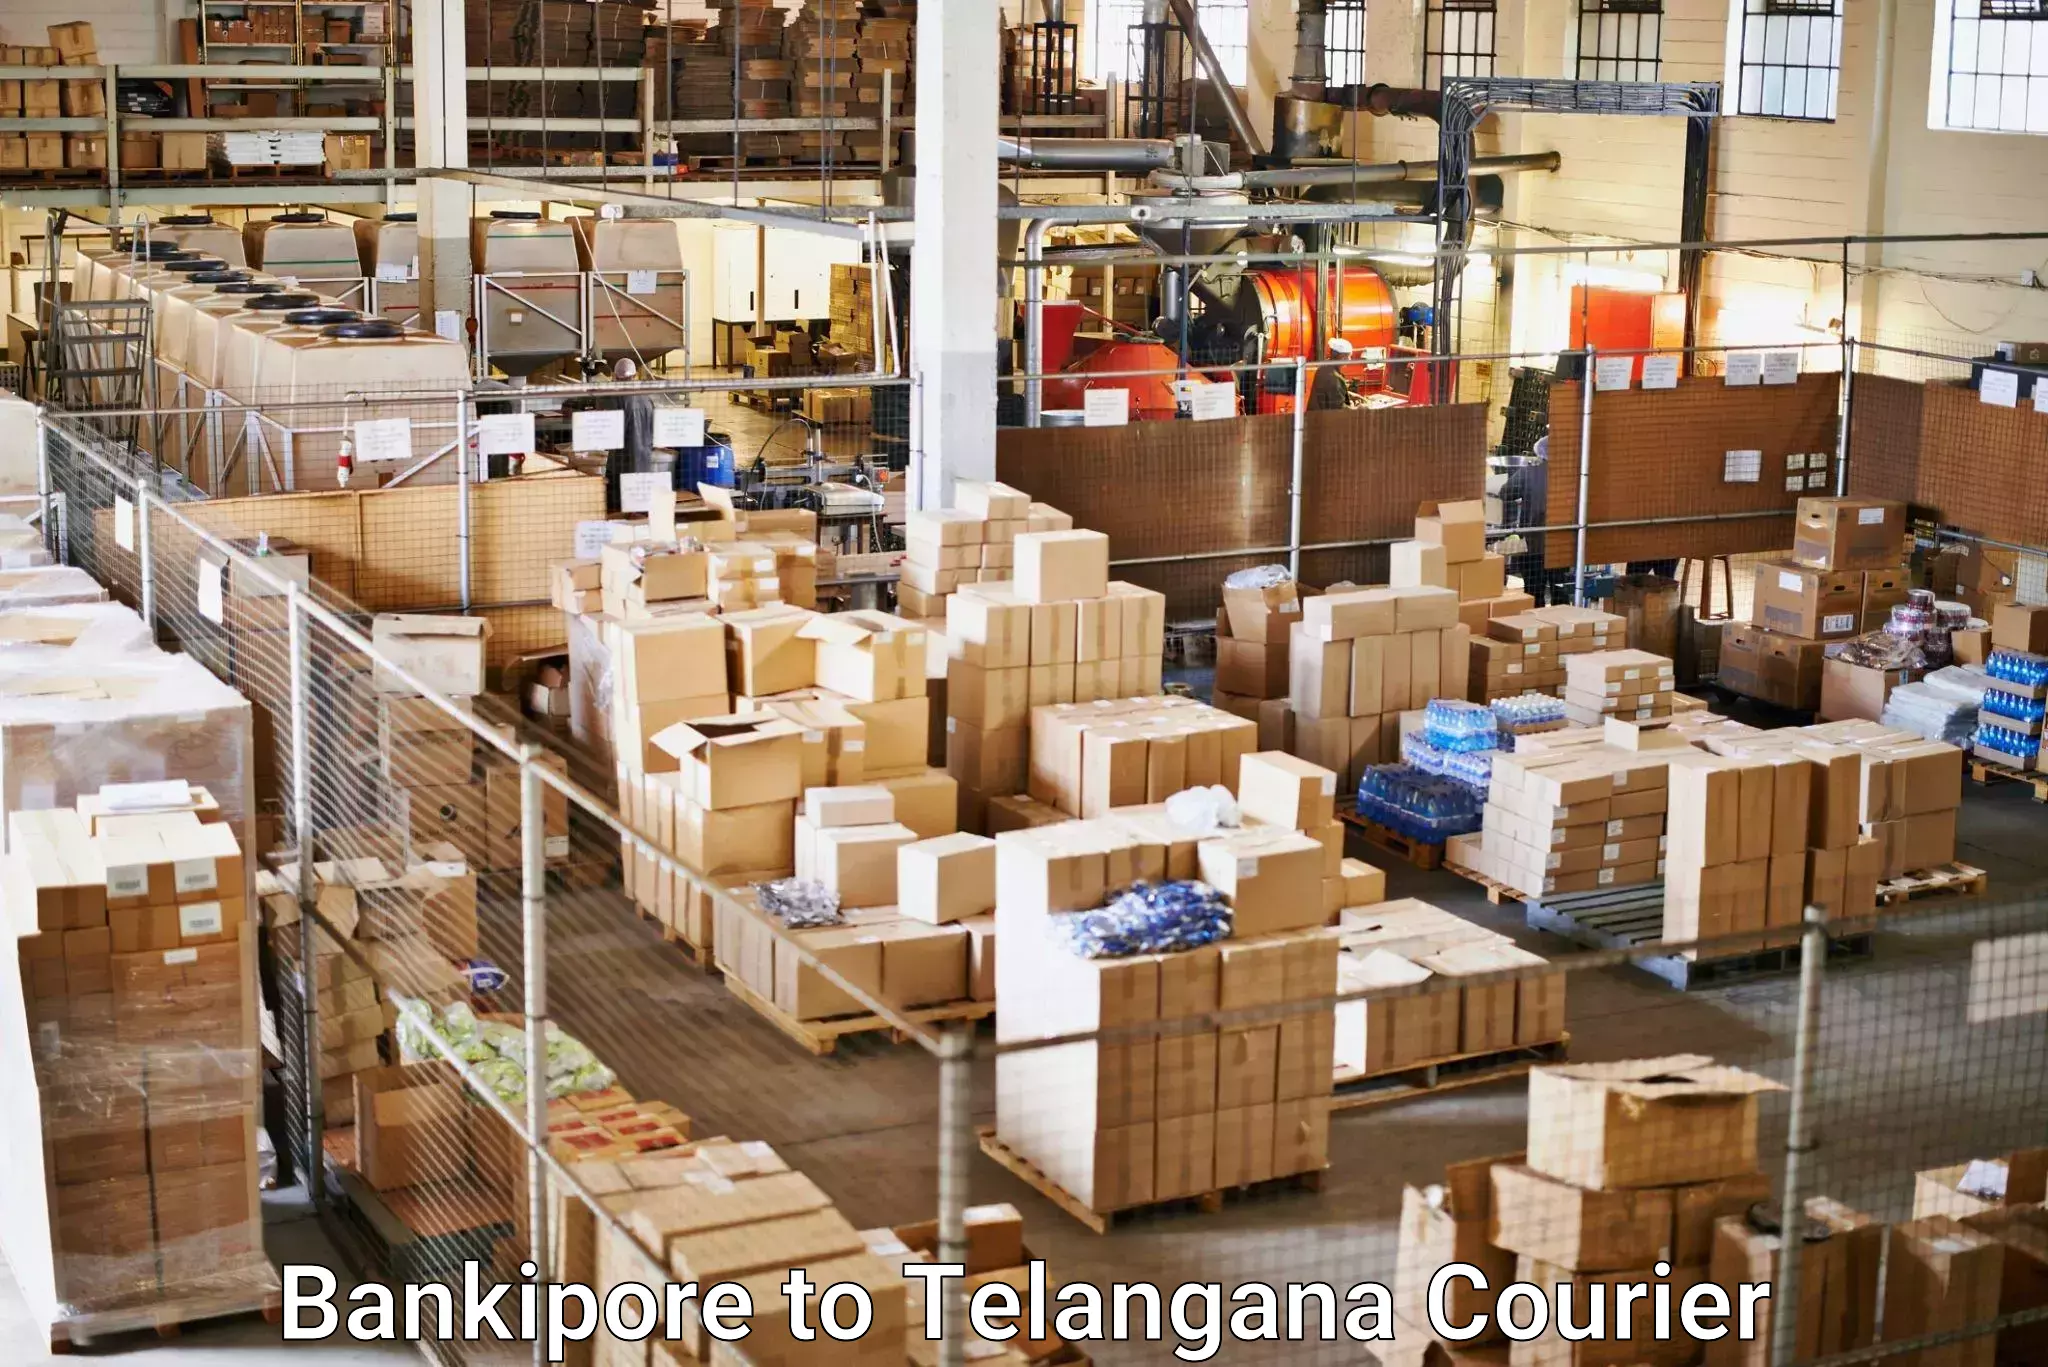 Expedited shipping methods Bankipore to Secunderabad